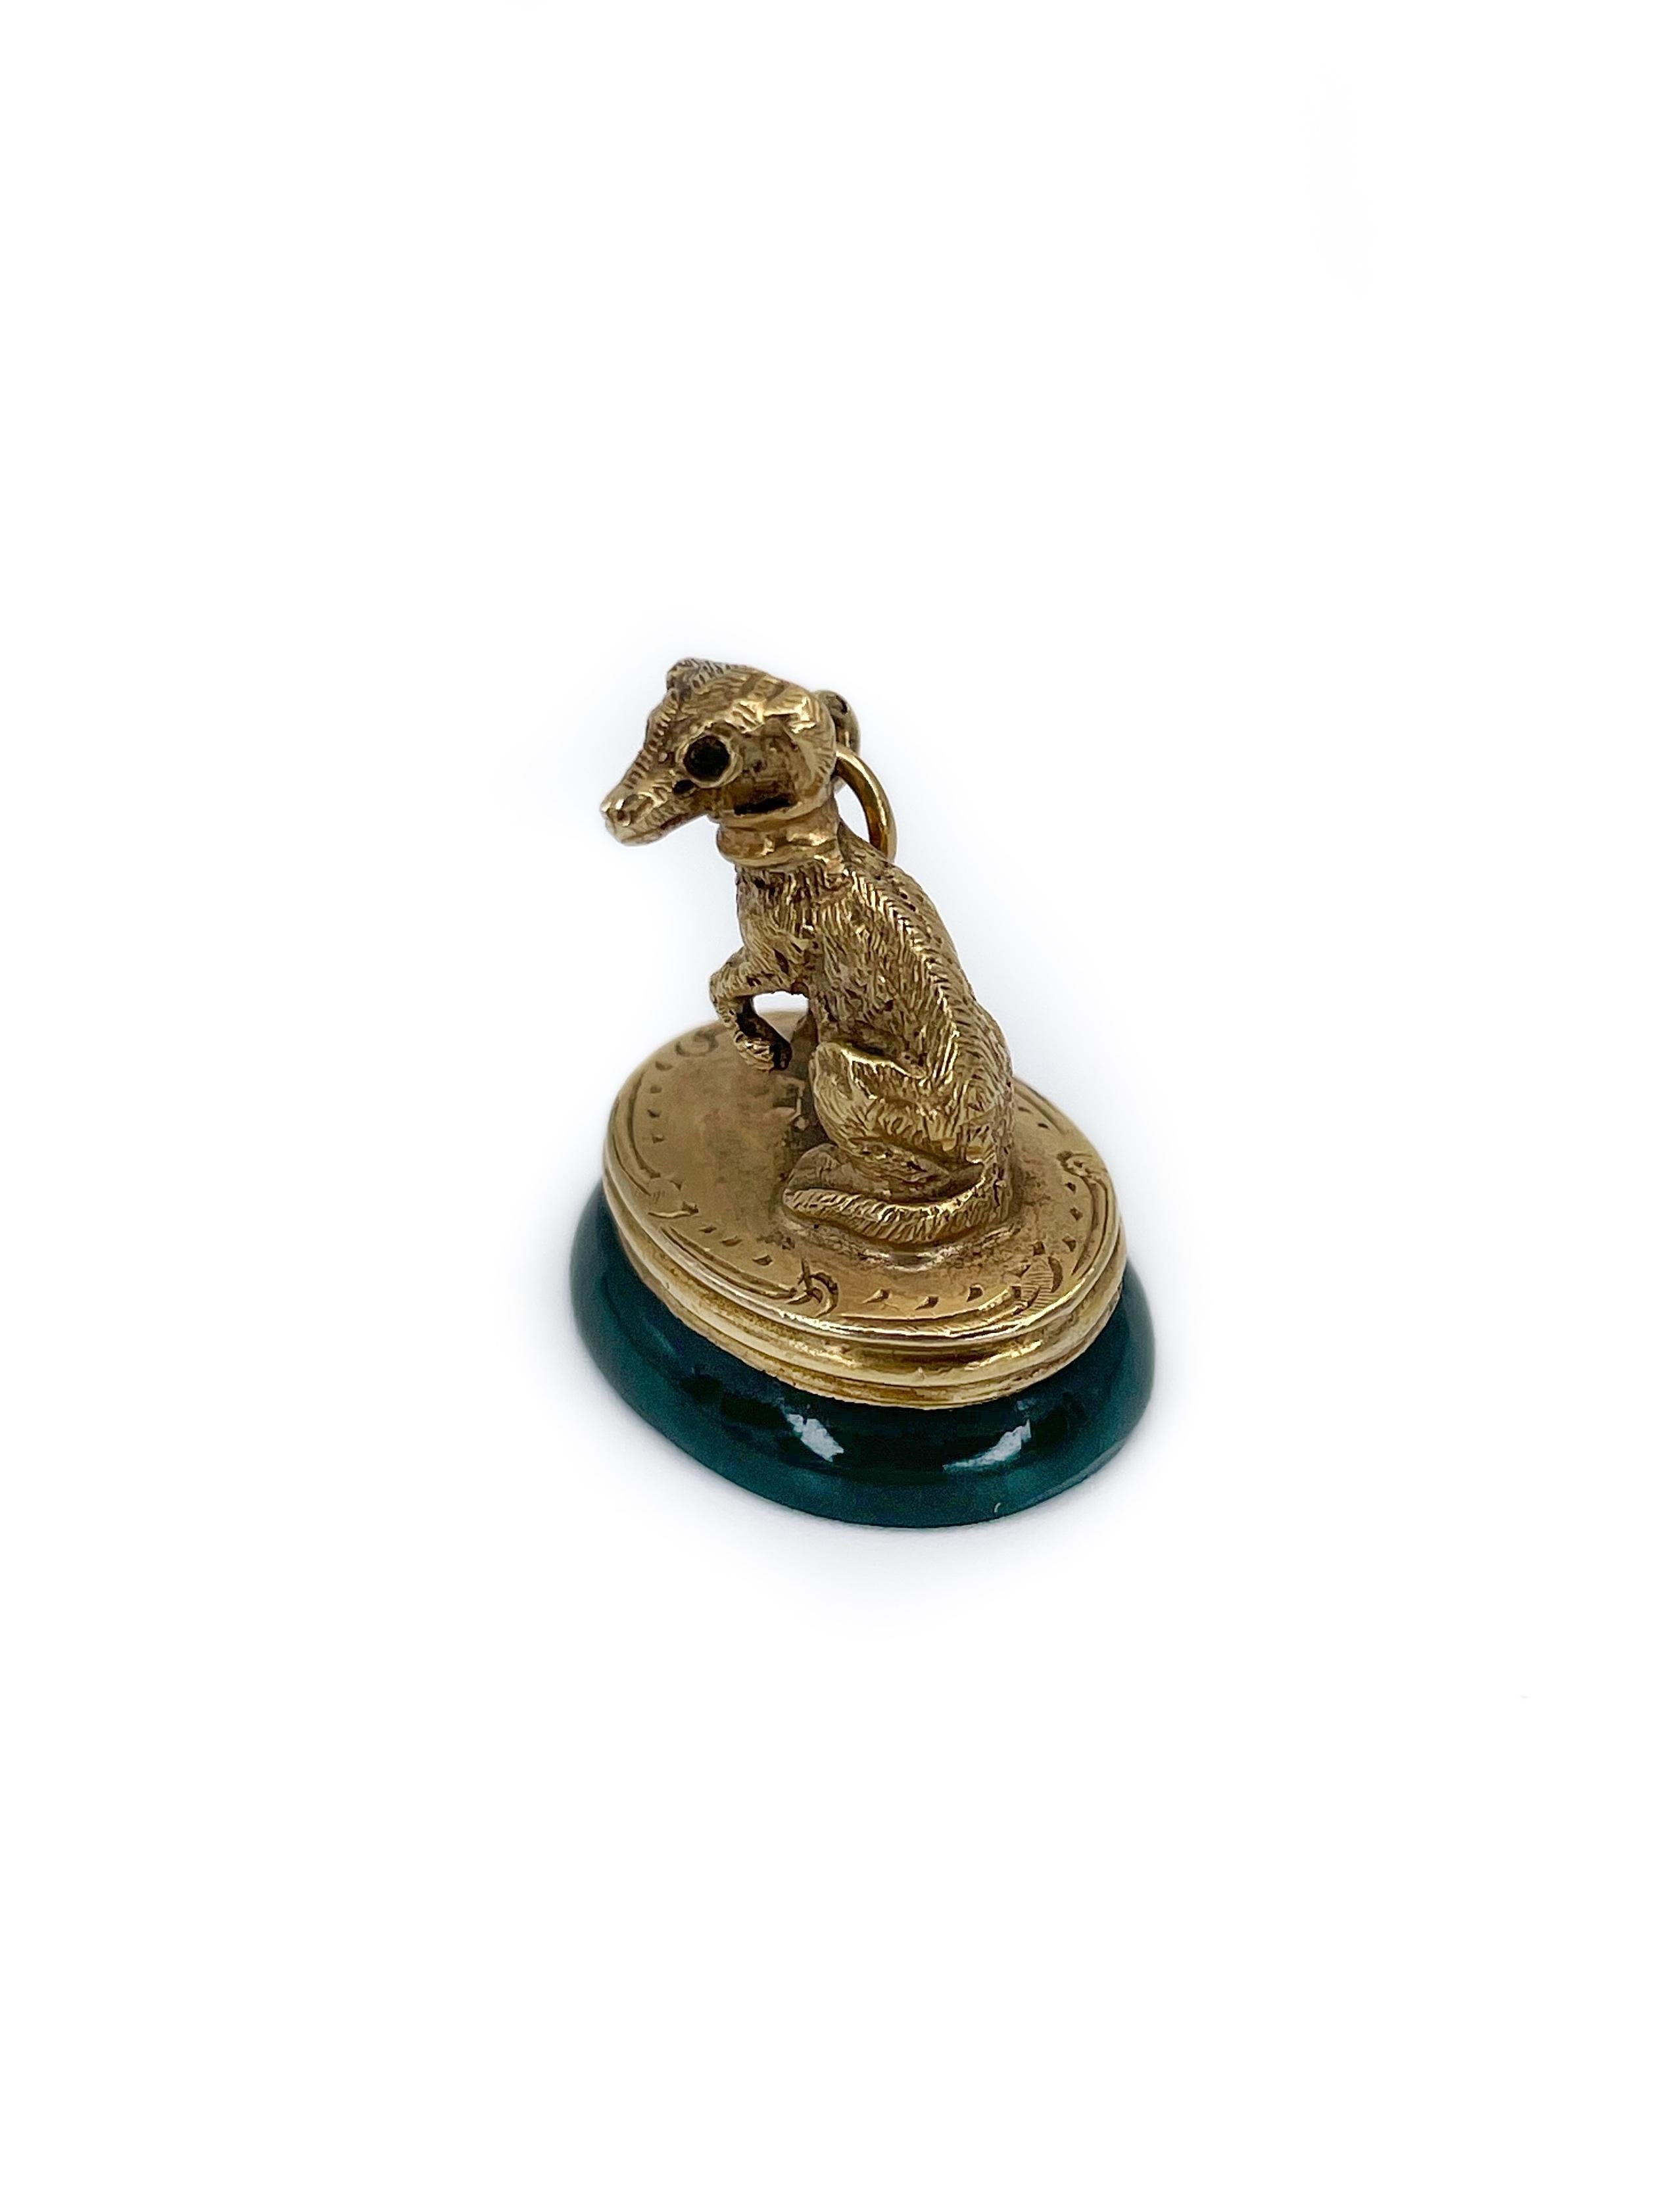 This is an exceptional Victorian watch fob seal pendant depicting a greyhound dog. It is crafted in 14K gold. The piece features green oval bloodstone (8.00ct) engraved with stylised initials.

Figural fobs are very desirable and this one is really